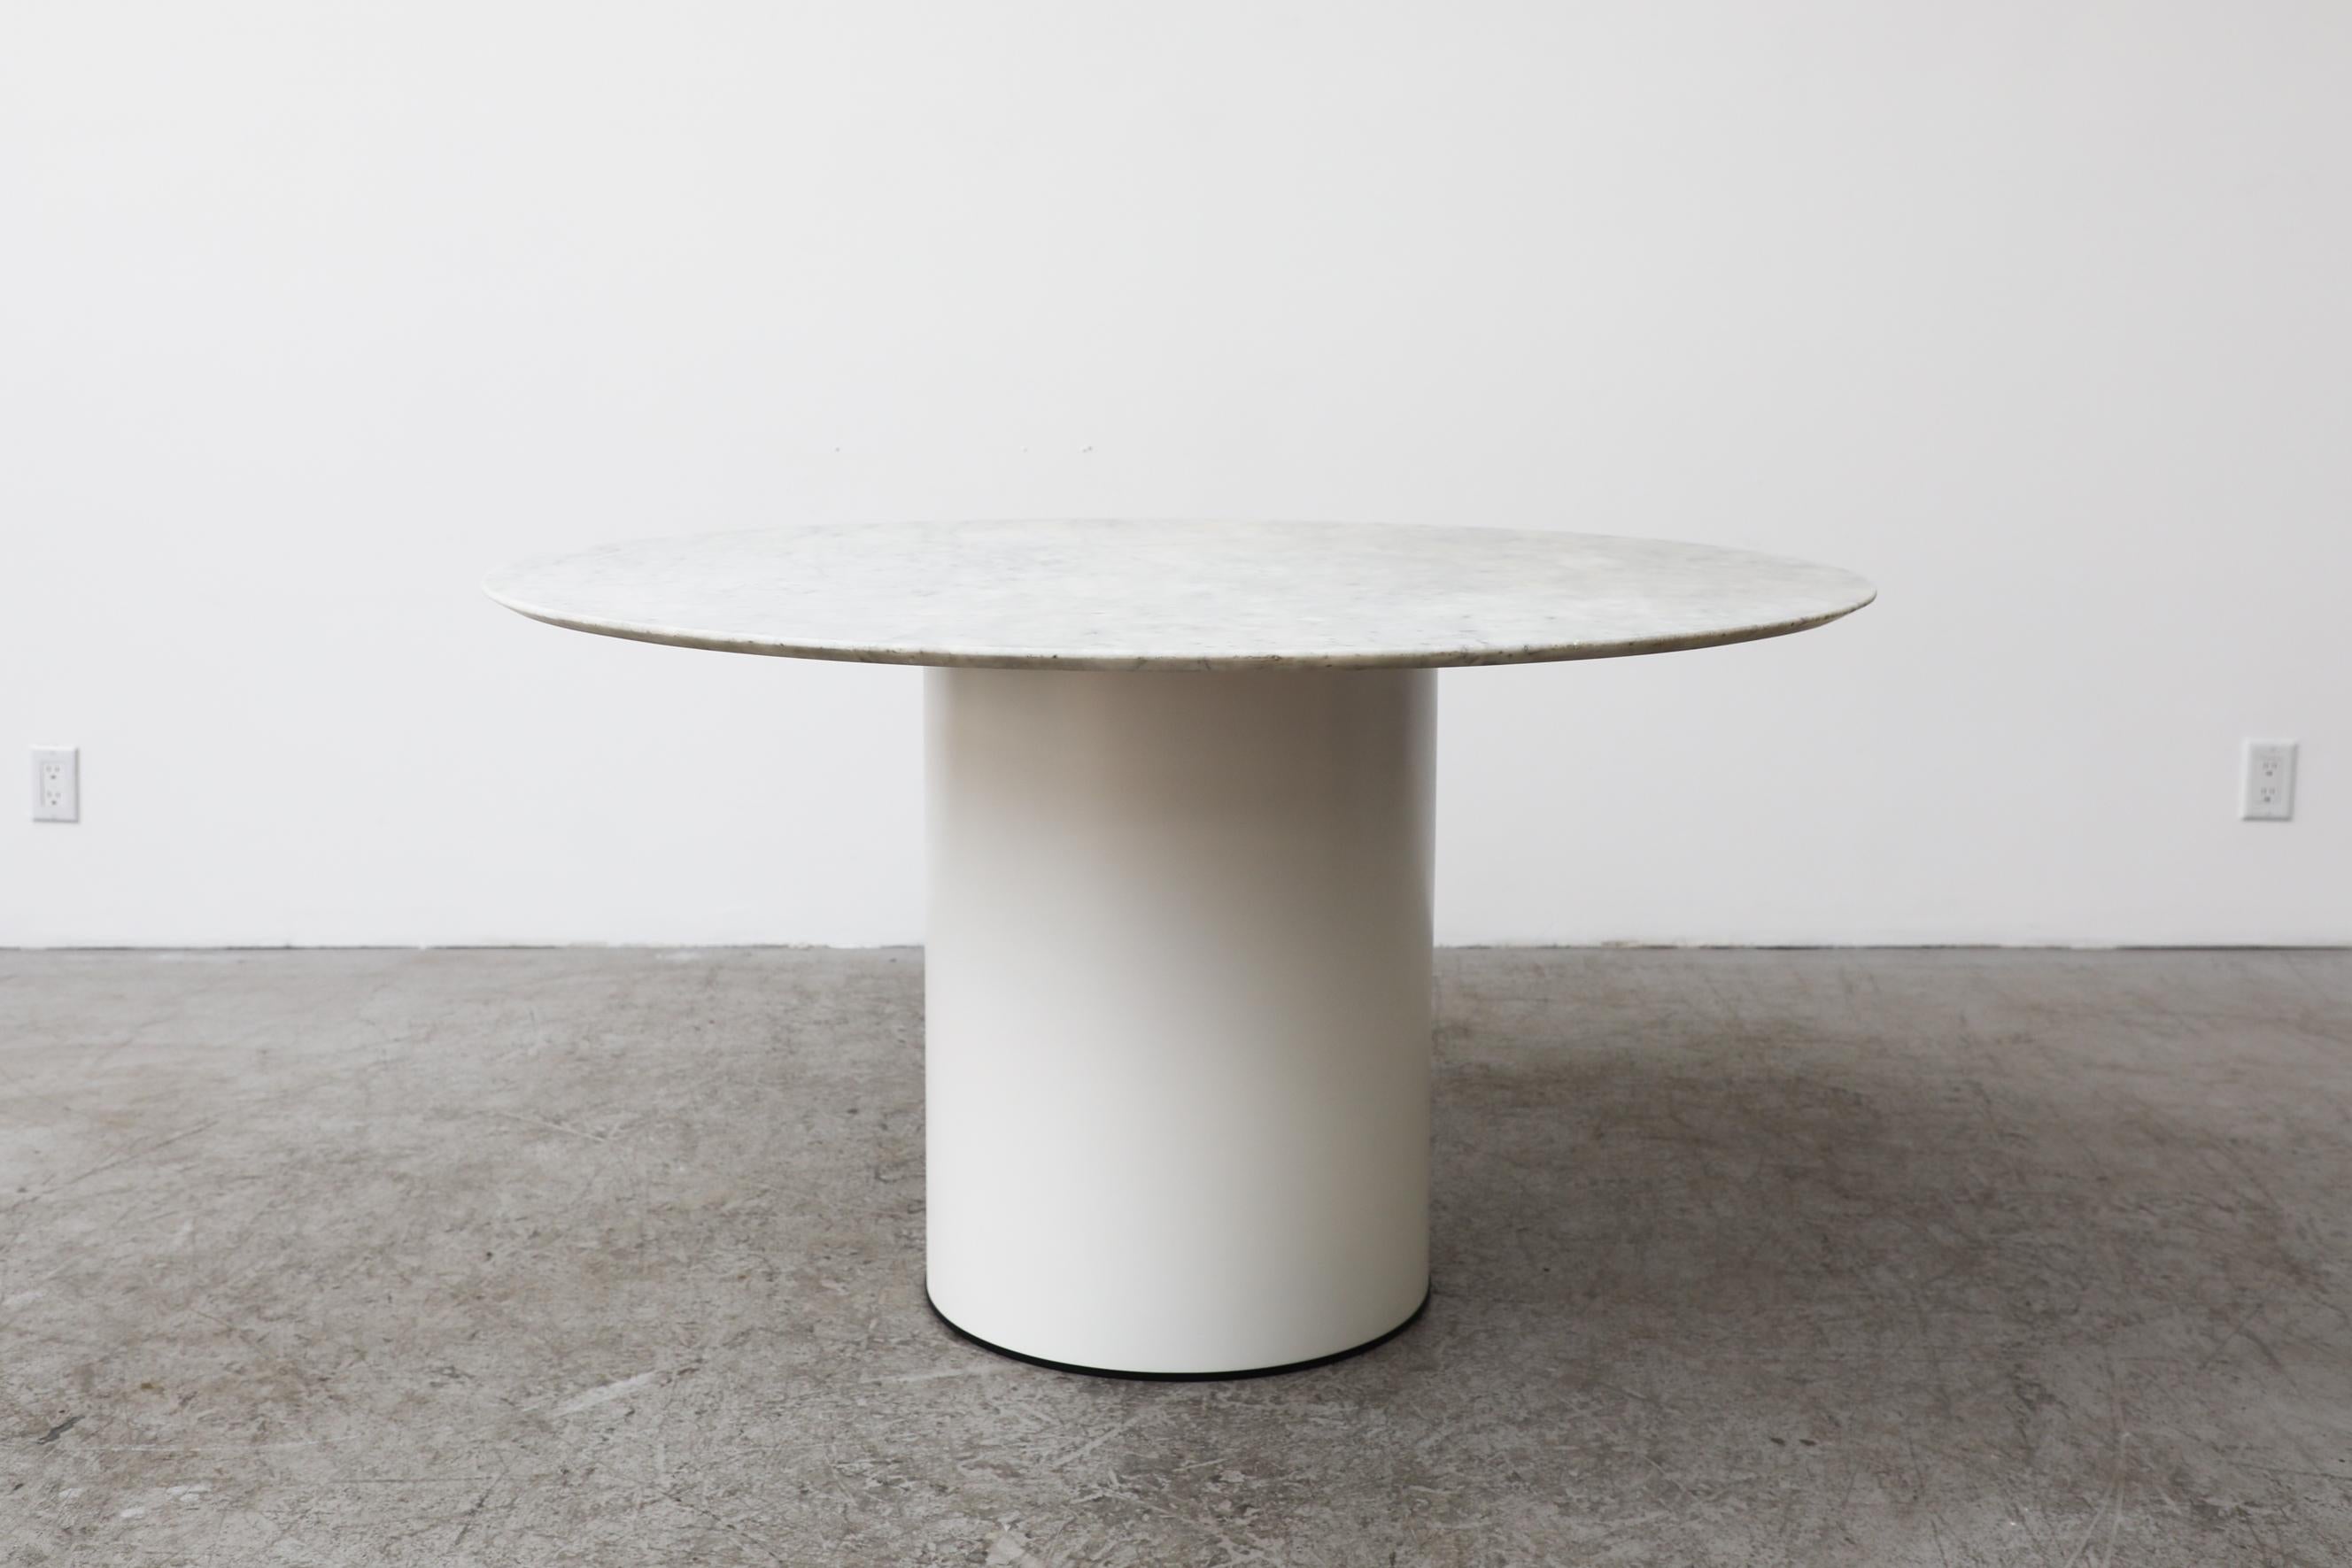 Vintage, Mid century marble pedestal table by Metaform. Top is solid marble and base is a white enameled metal. Can be used as a center table or dining table. The table is in original condition with visible wear, including some discoloration and